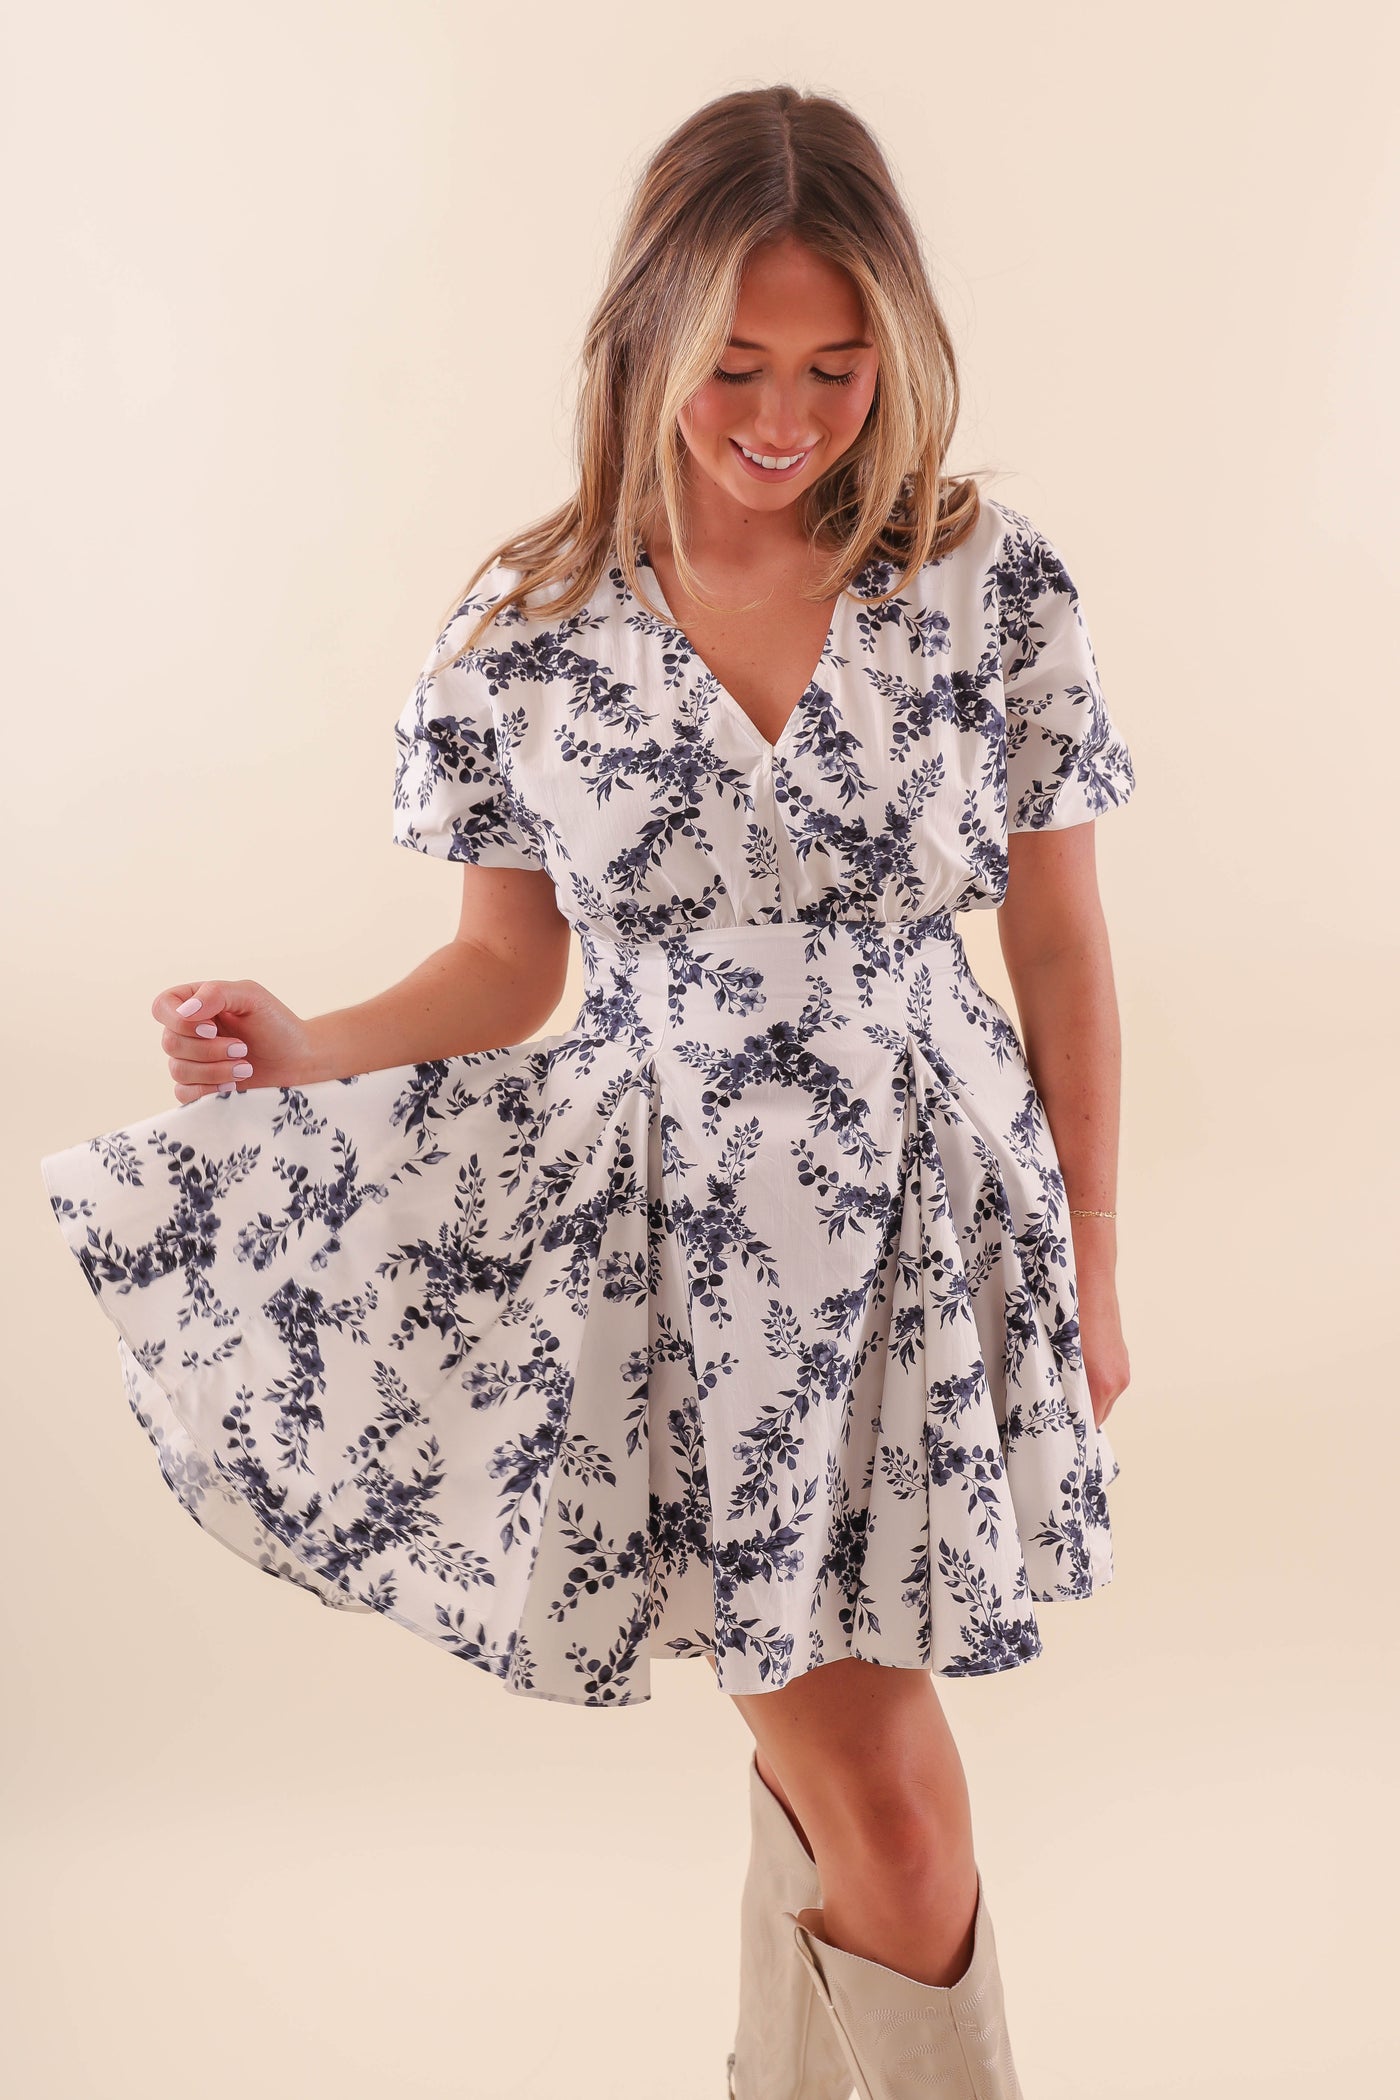 White and Navy Floral Dress- Fit and Flare Floral Dress